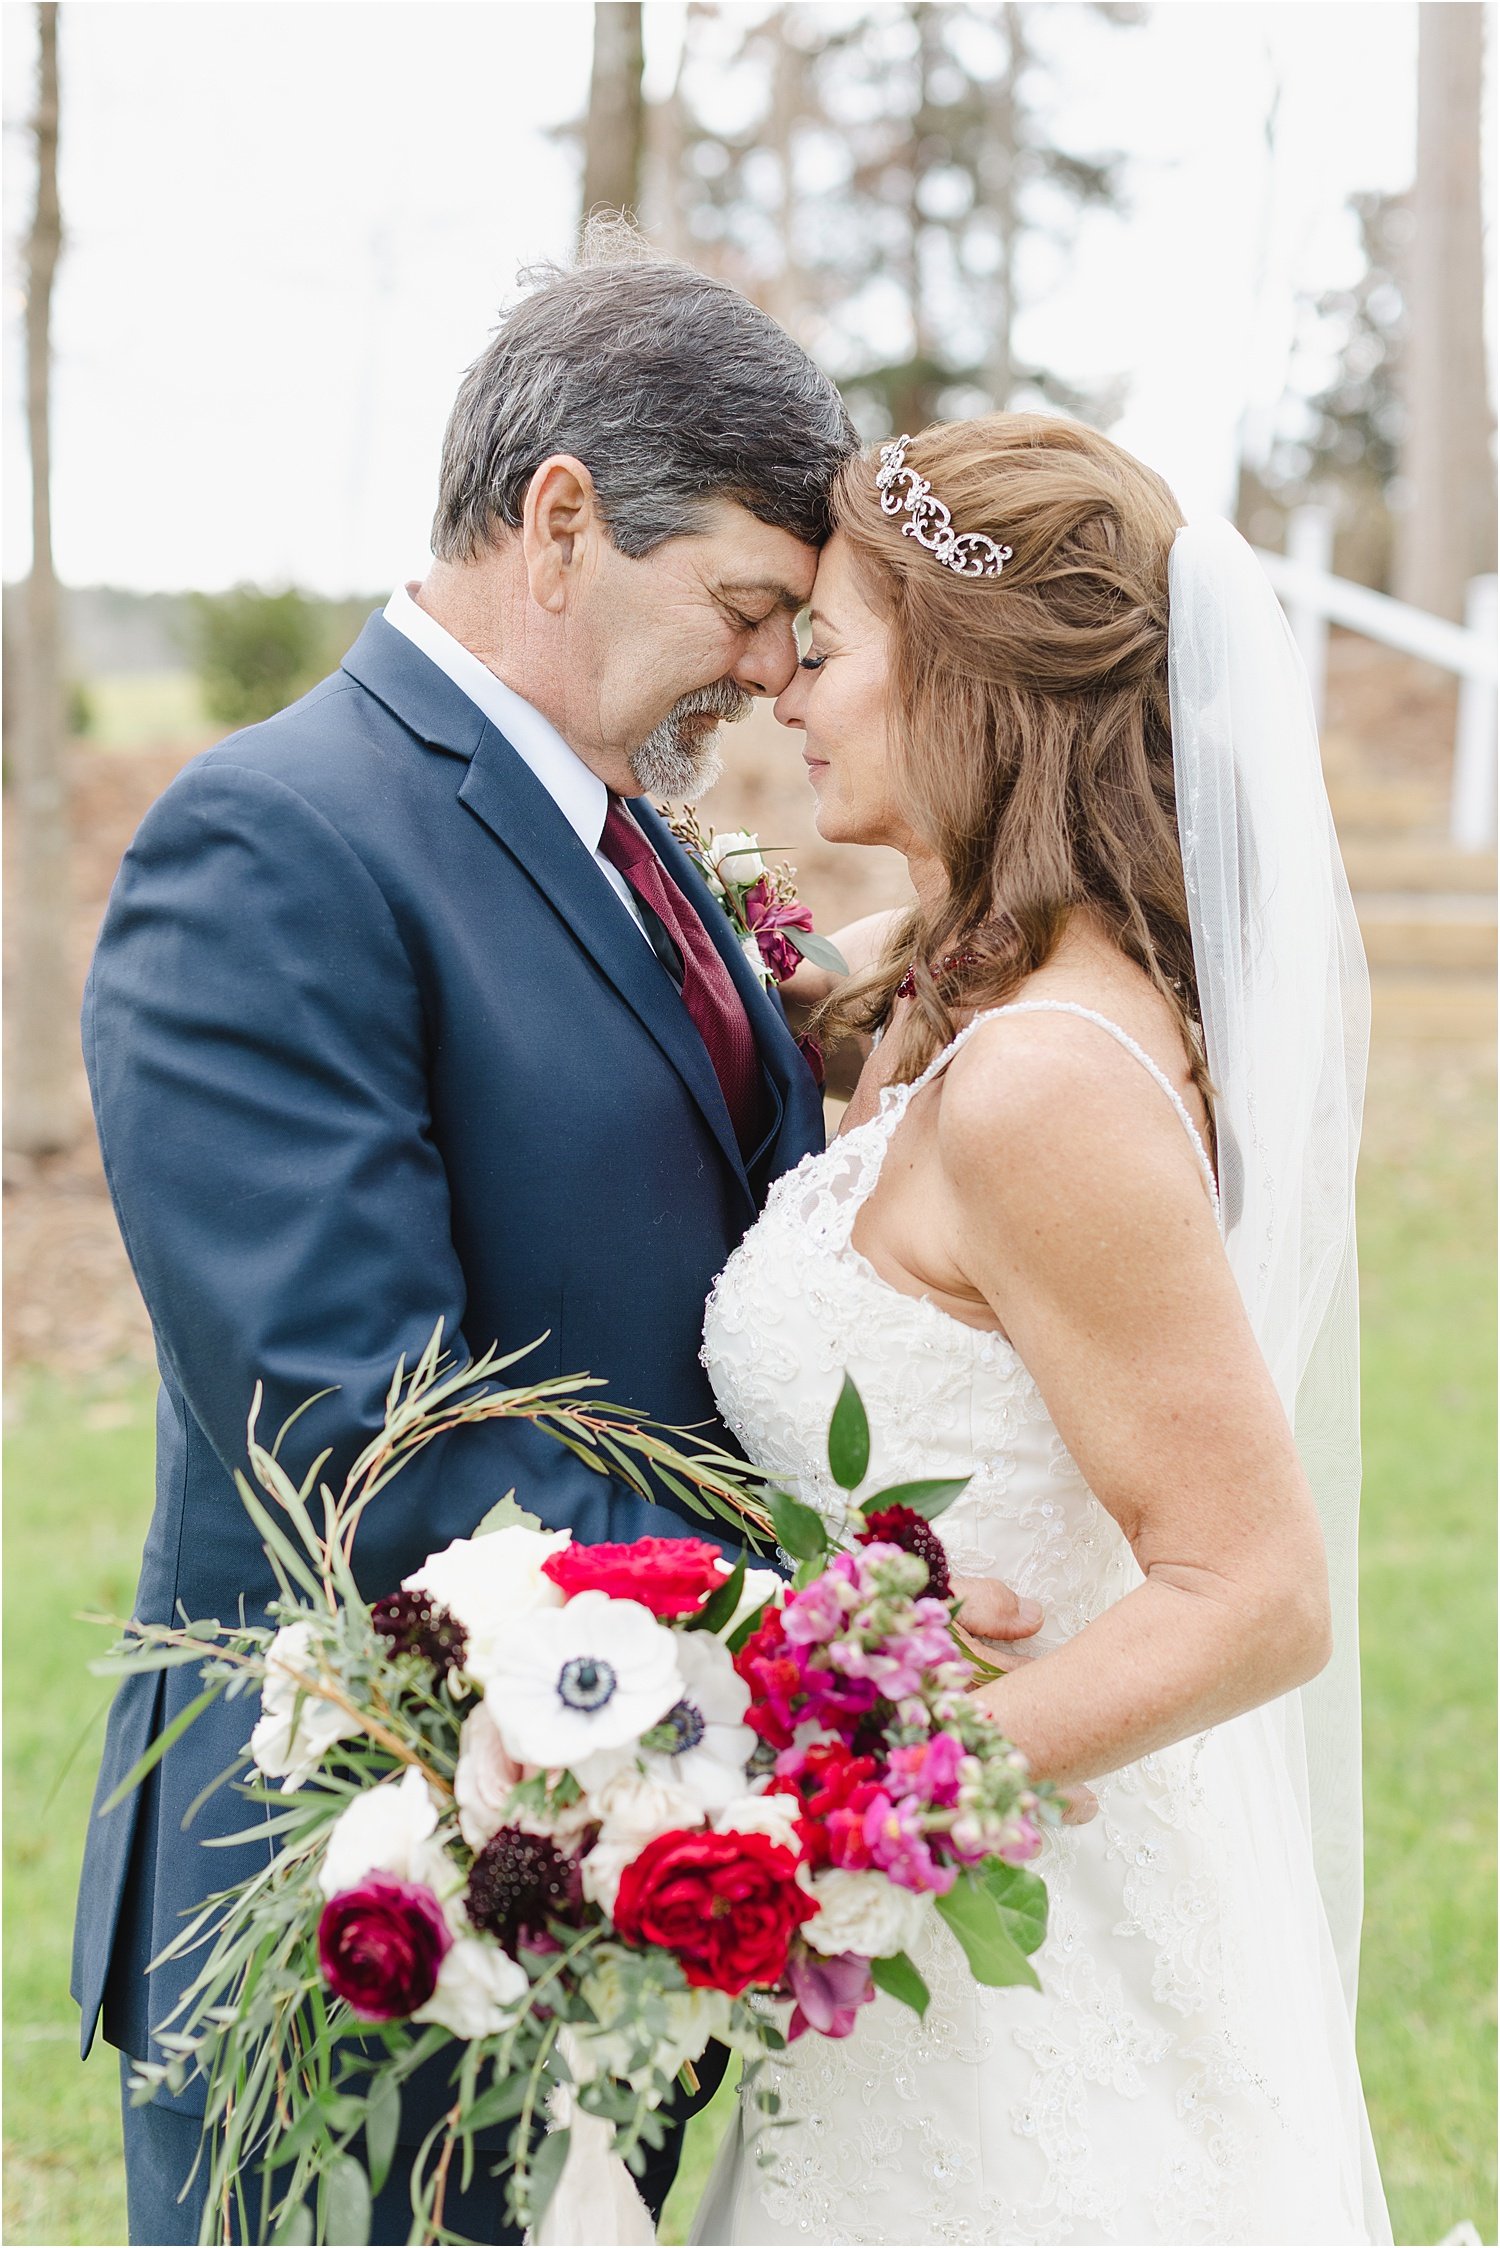 Posed Photo of Bride and Groom Touching Foreheads